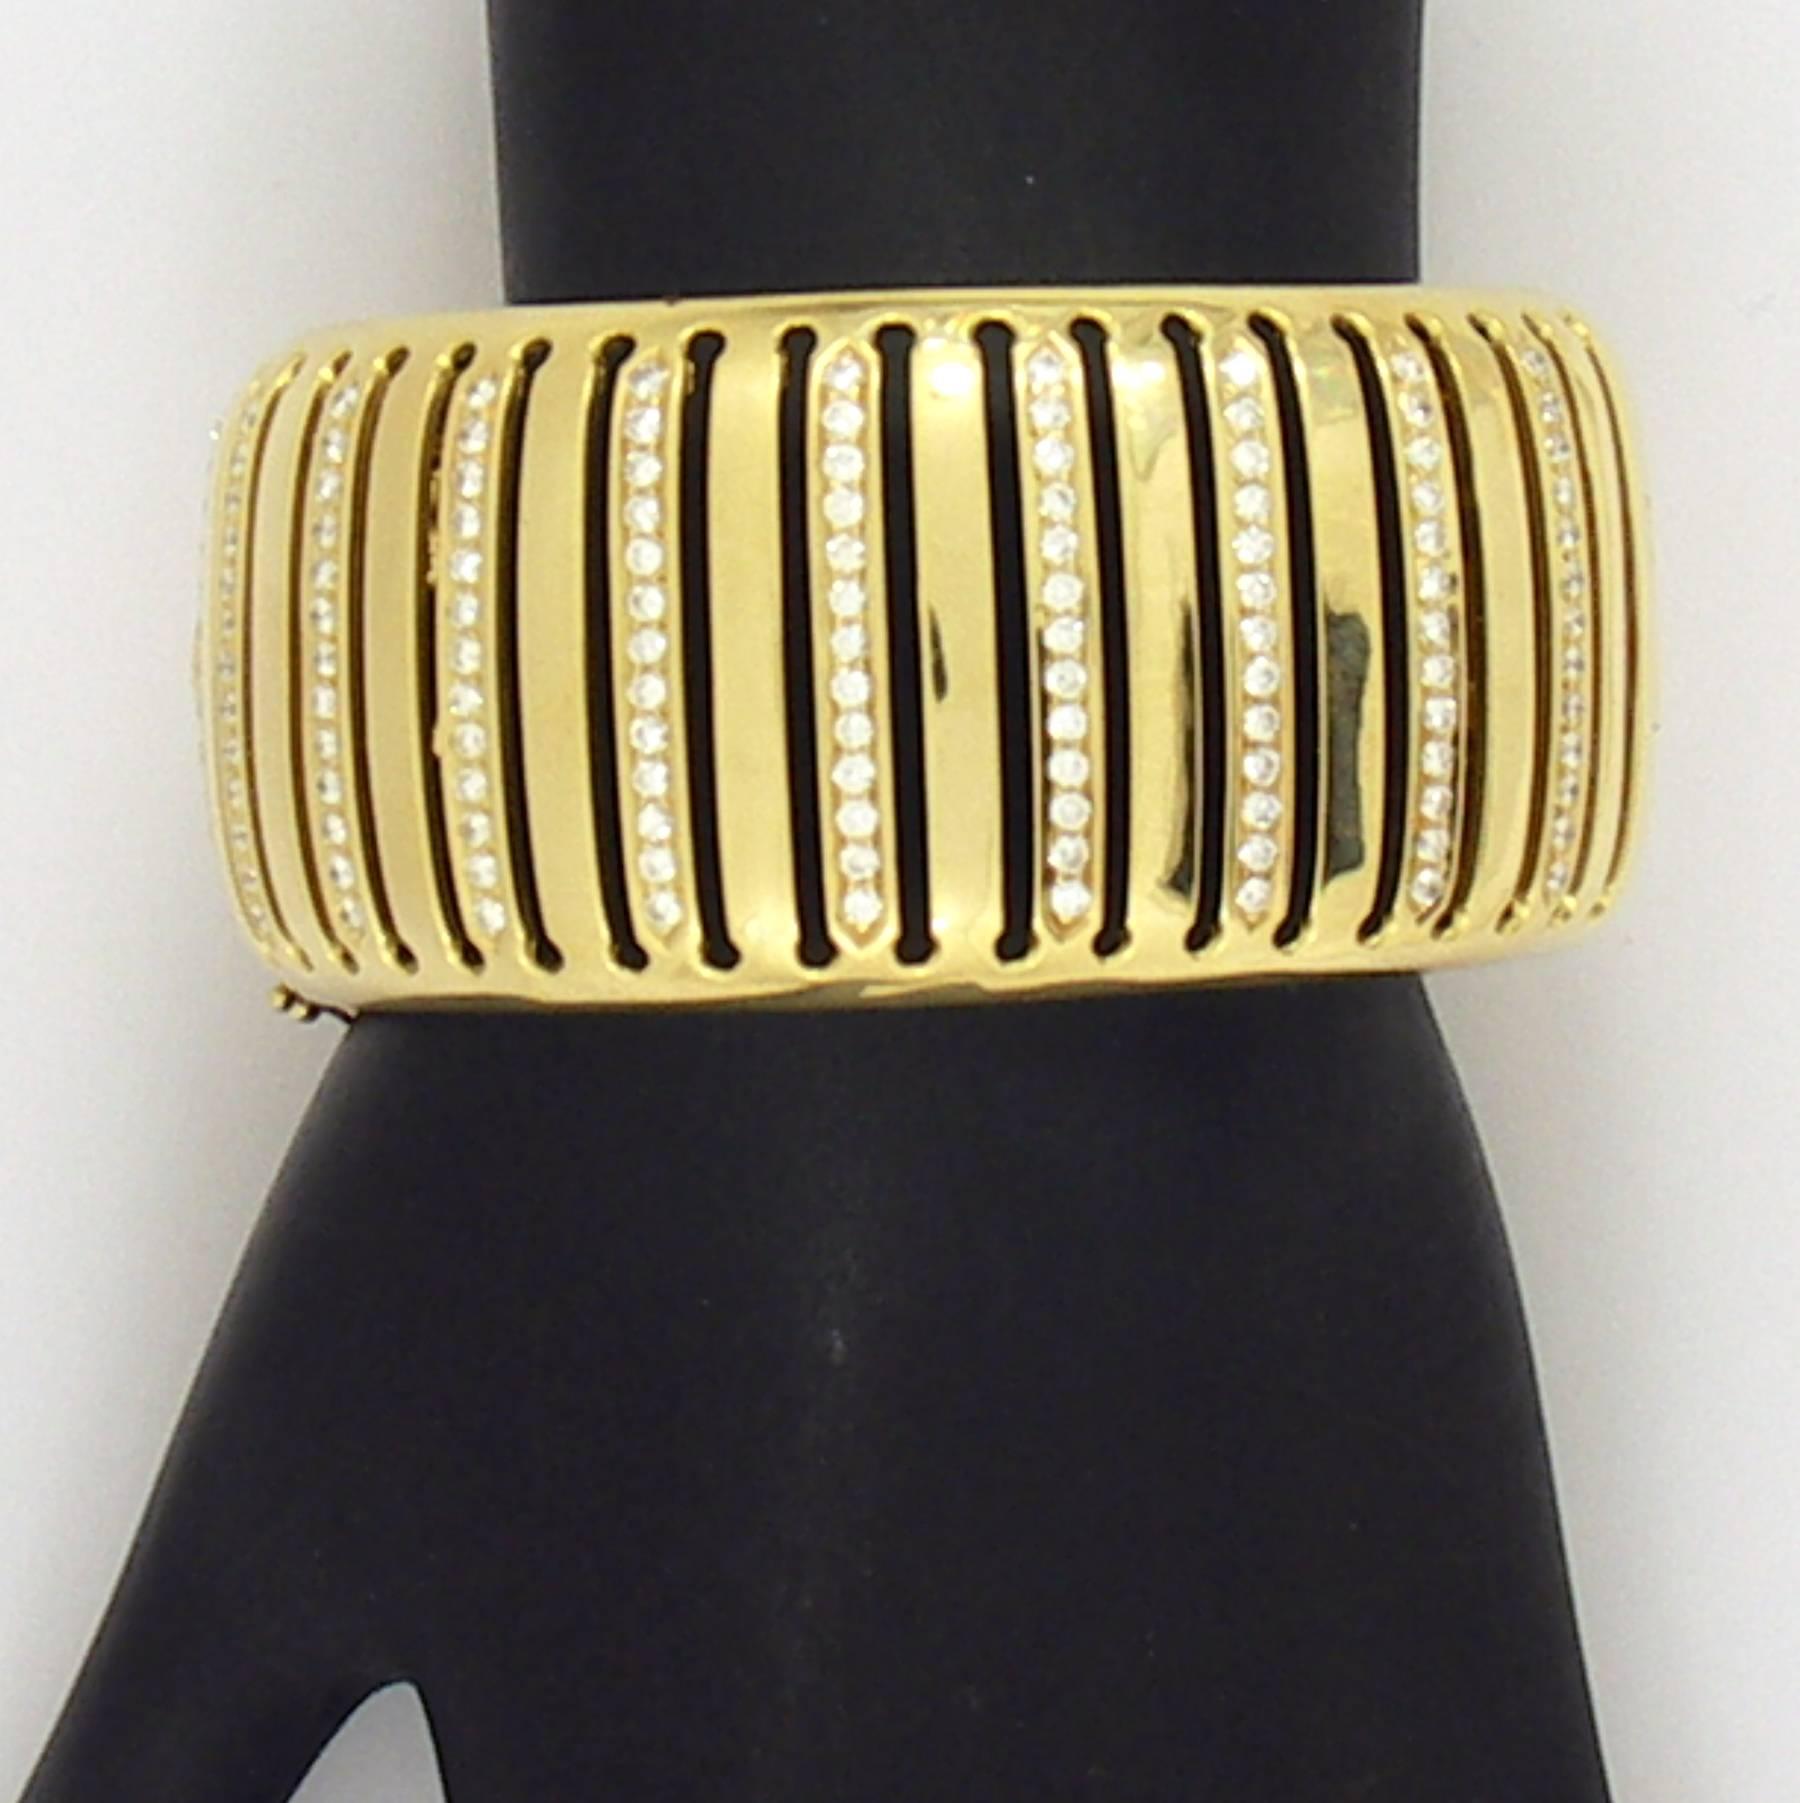 An 18K yellow gold, hinged cuff bracelet, measuring 1 1/8 inches wide, with a birdcage design. The top of the bracelet features alternating gold and pave' set diamond slats. There are 130 round brilliant cut diamonds for a total approximate weight